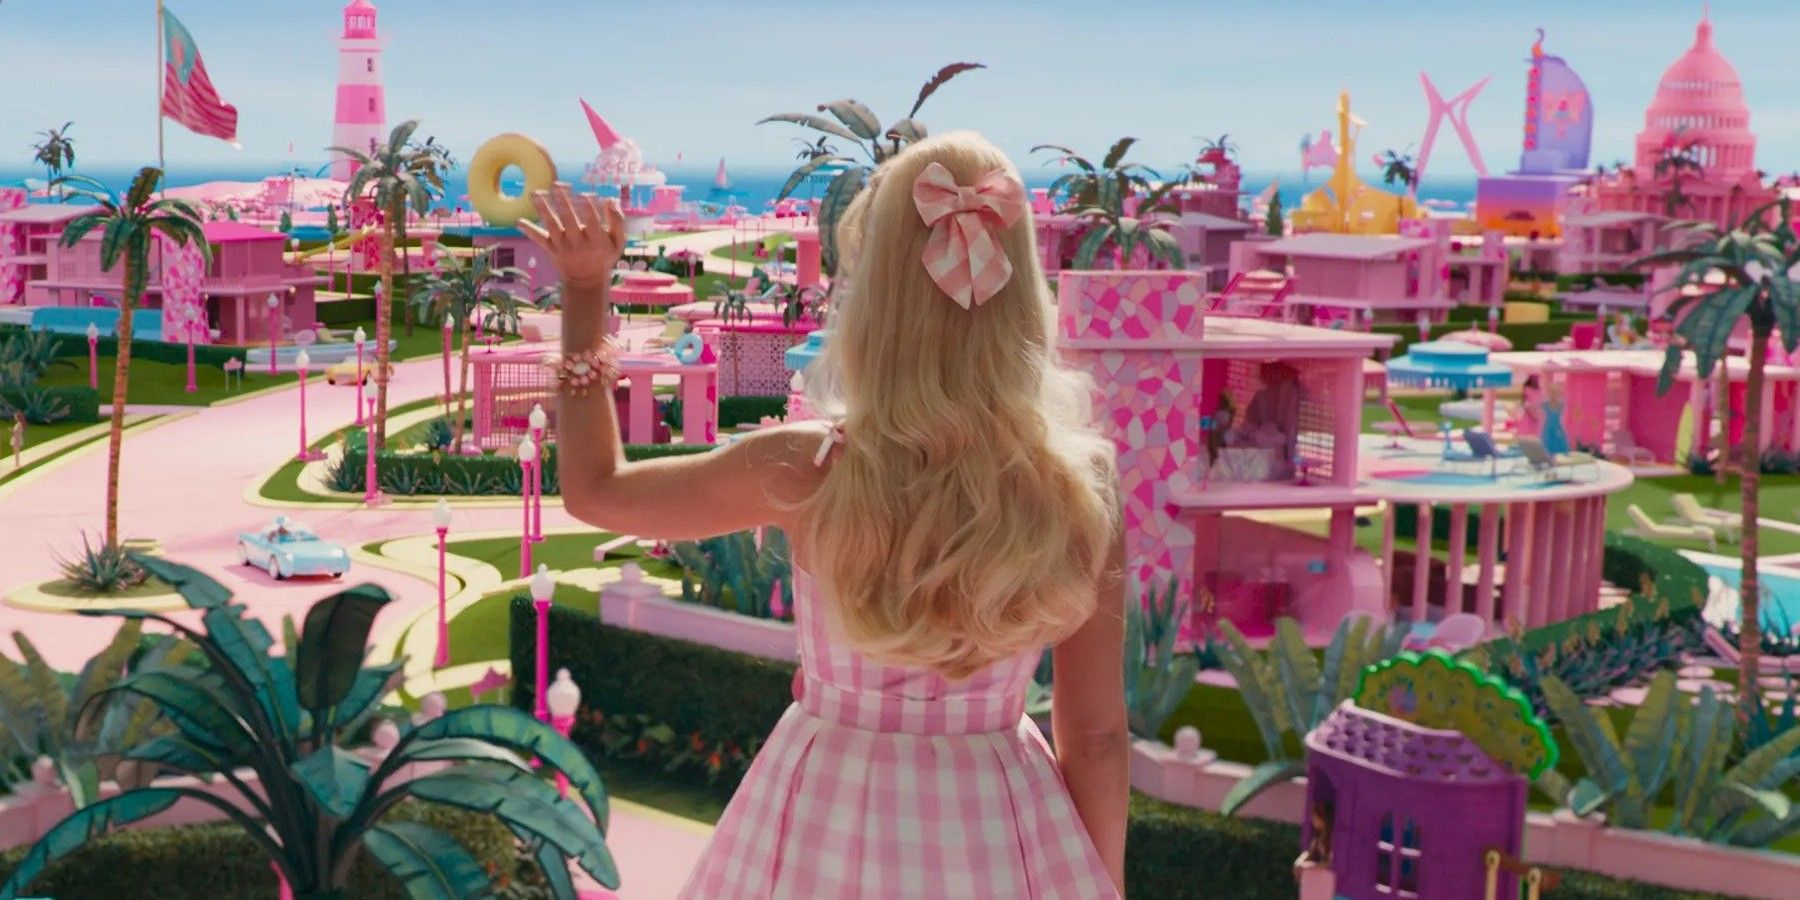 Margot Robbie's Barbie waves hello to the rest of Barbieland